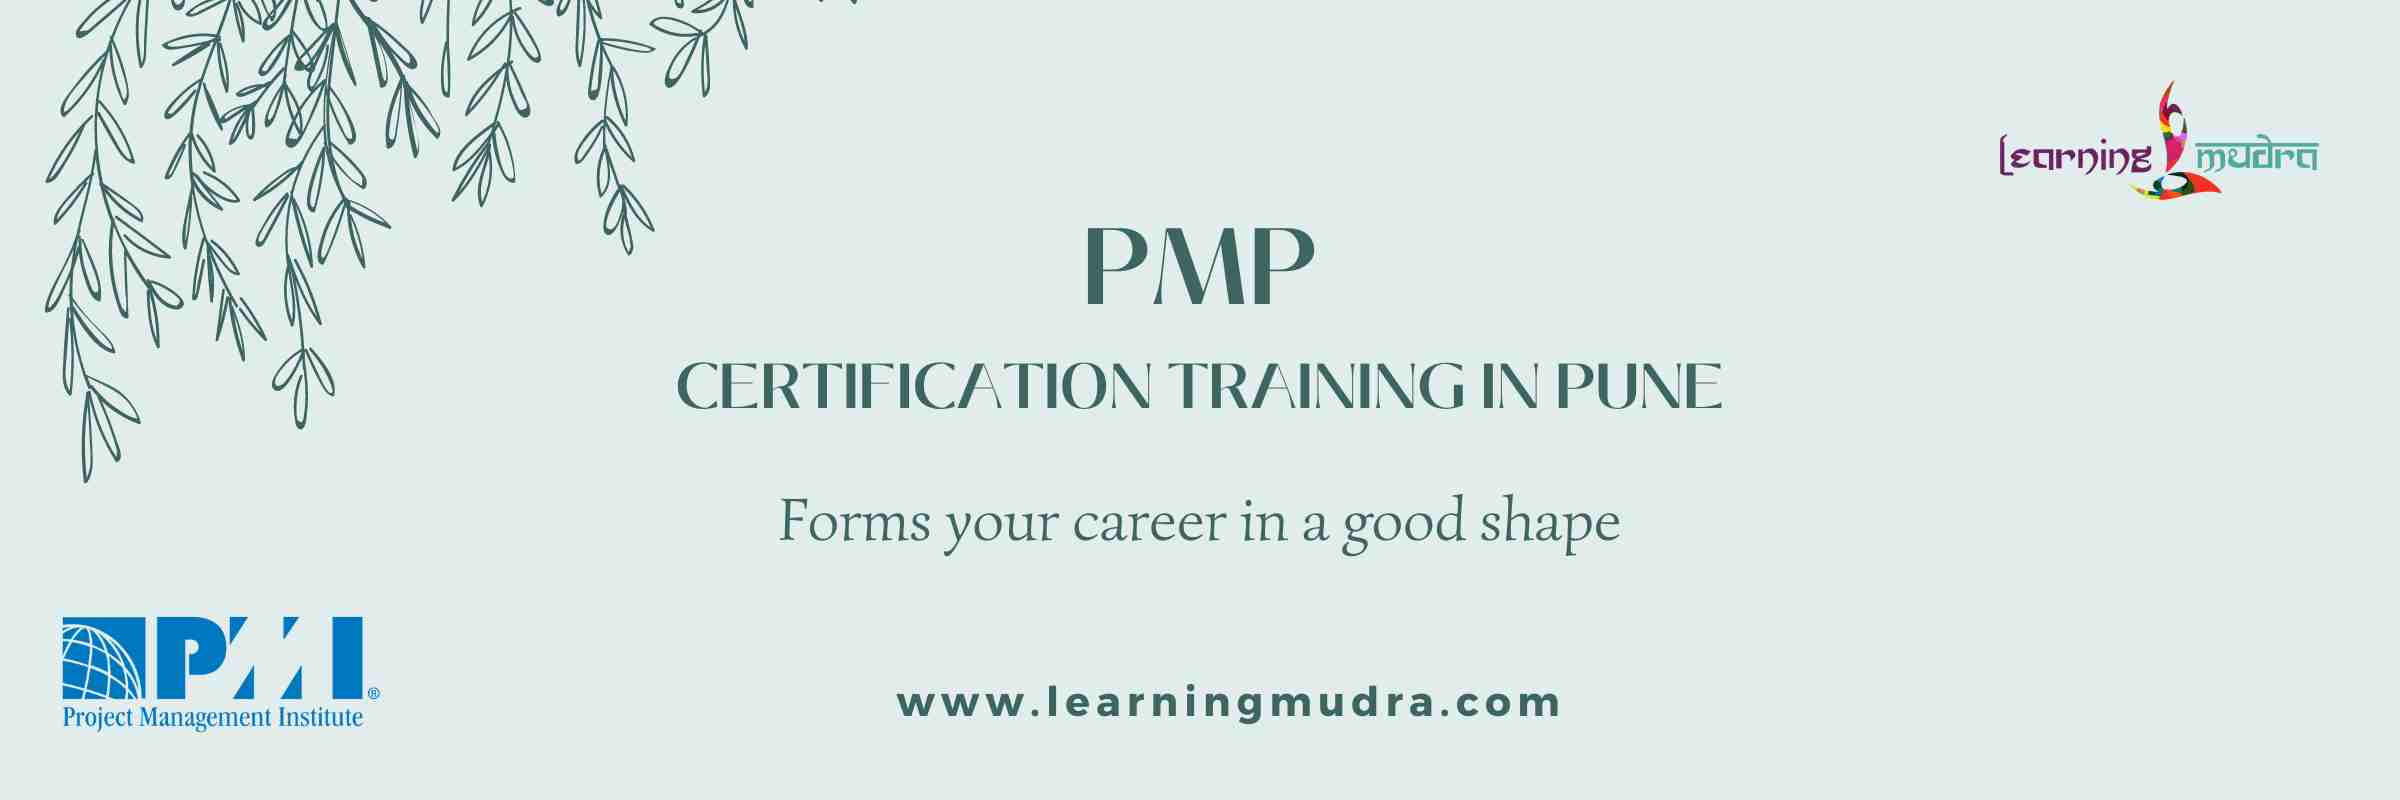 pmp certification training in pune